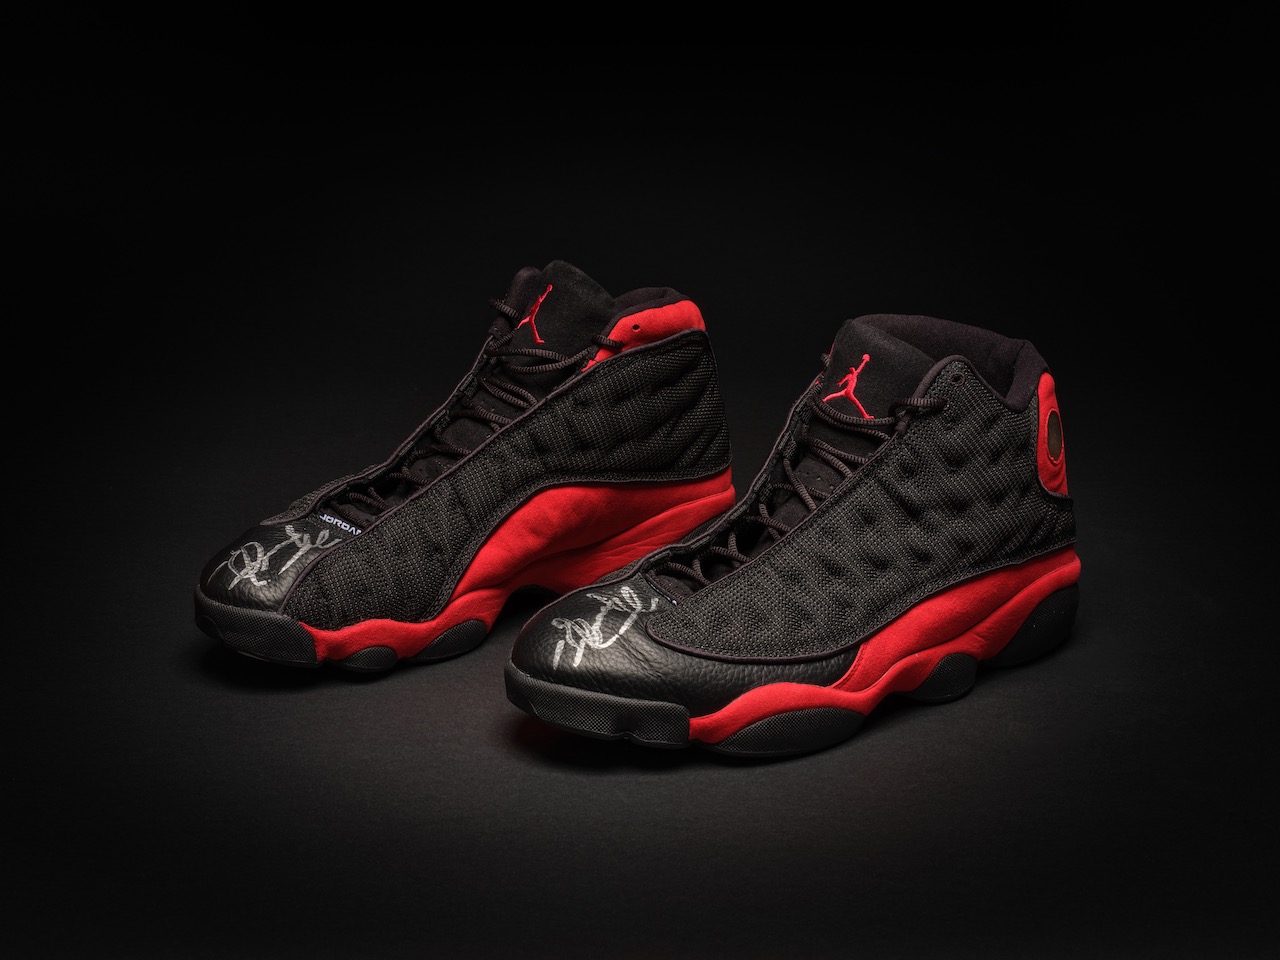 A pair of rare, game-worn, autographed Air Jordan 13's from Sotheby's auction sold for a record $2.2 million.